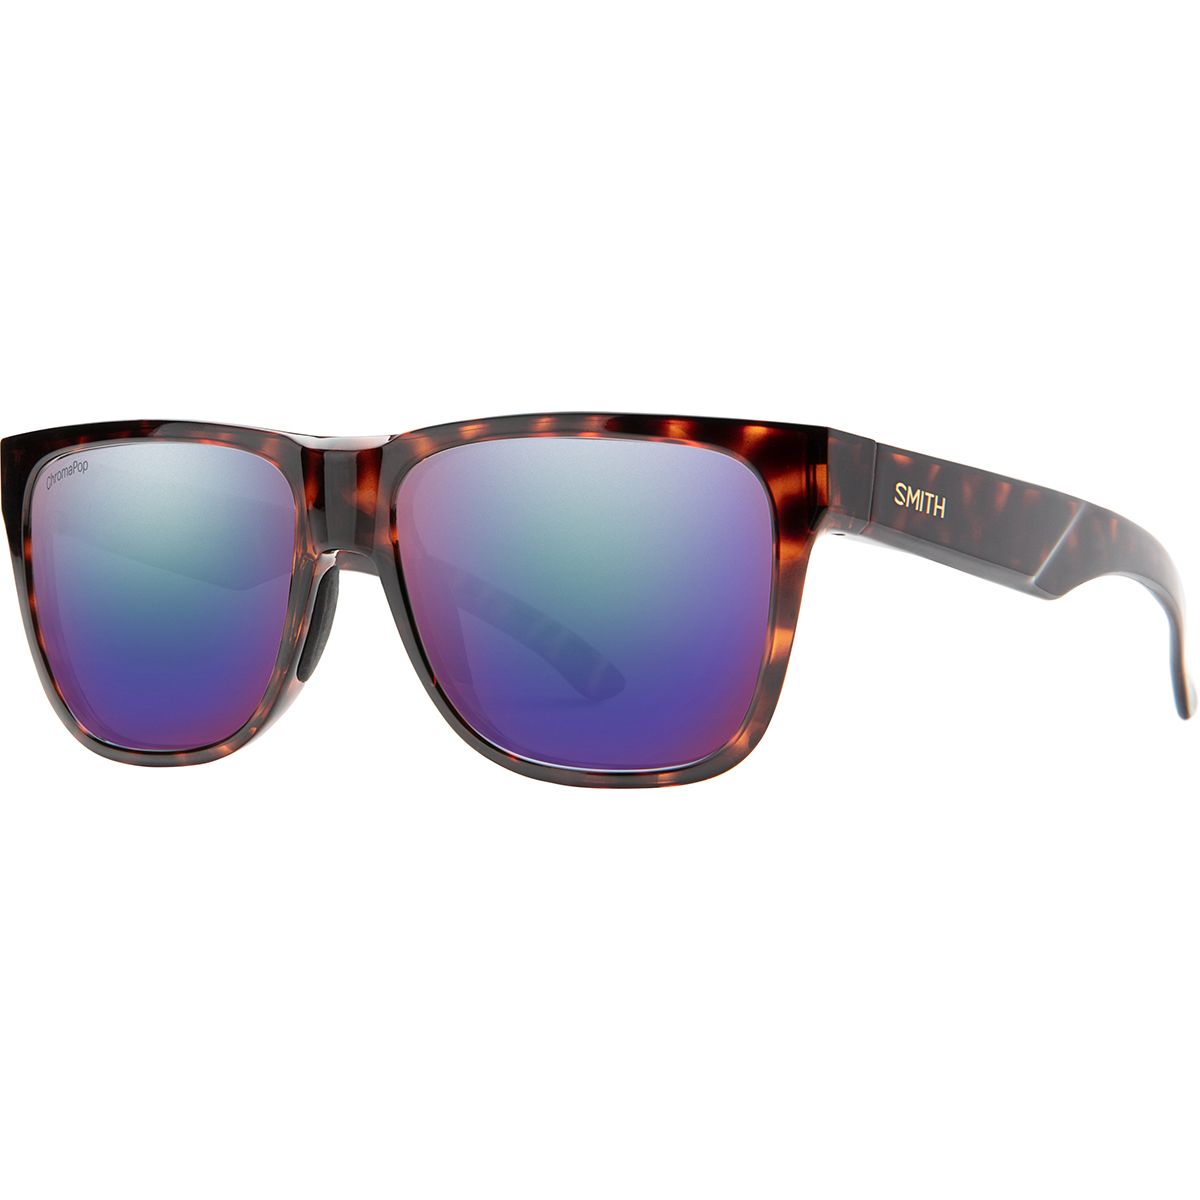 Buy new SMITH Eyewear Online at Discount Prices from fakeehvision.com –  Fakeeh Vision